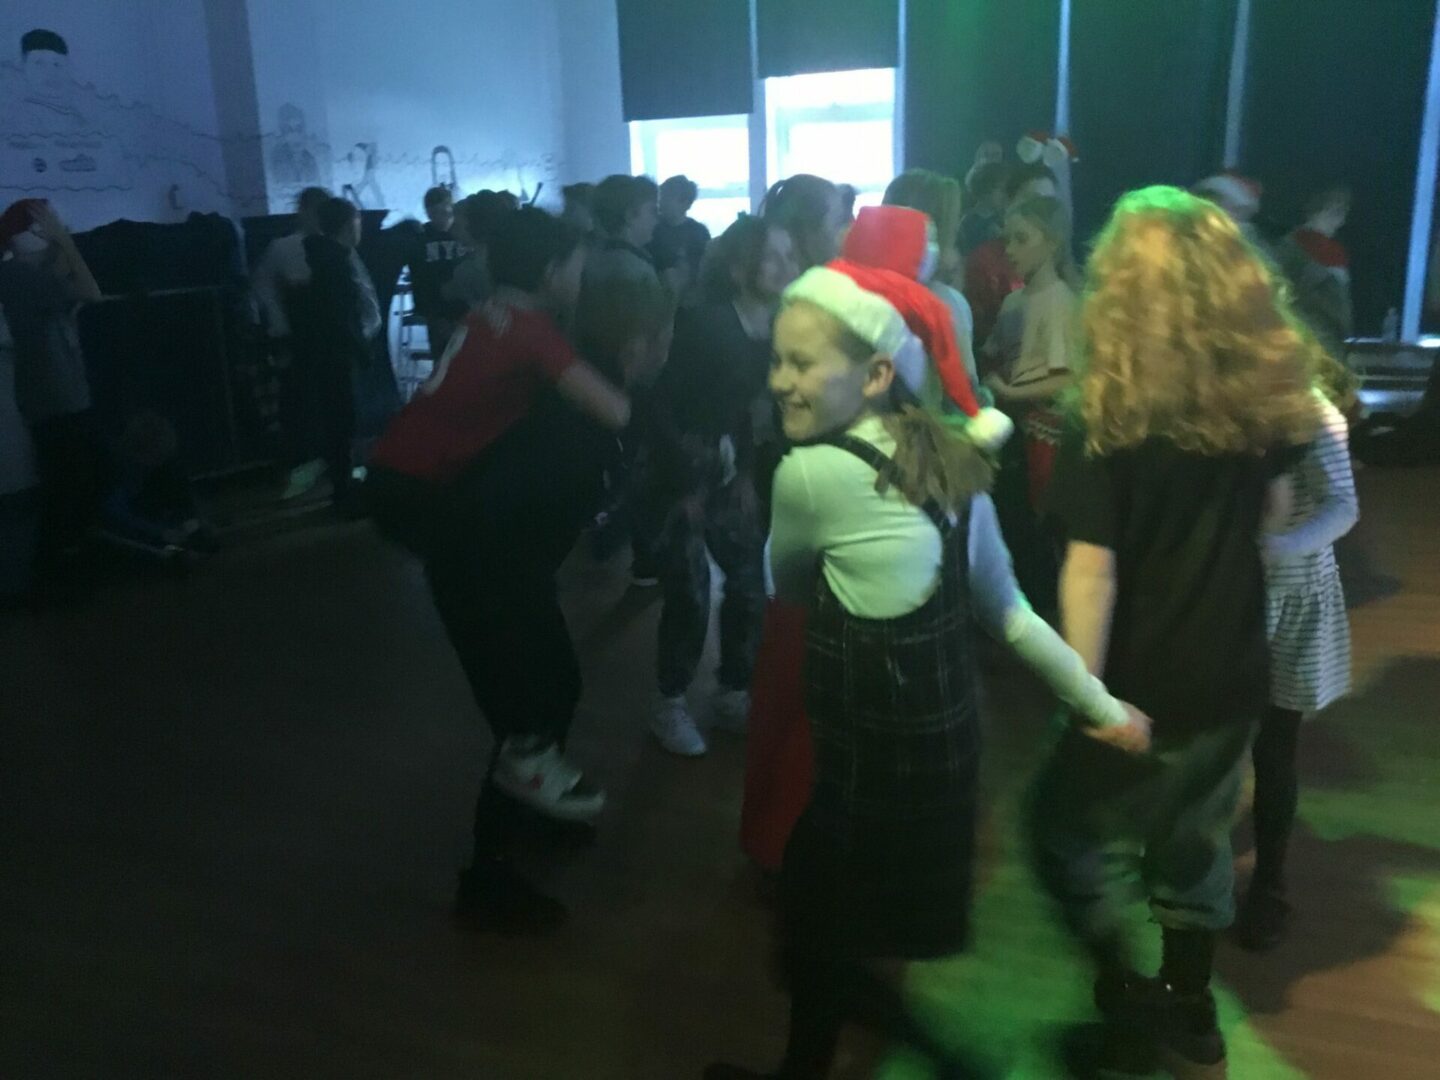 Year 5 enjoy their Christmas party, dancing in the hall